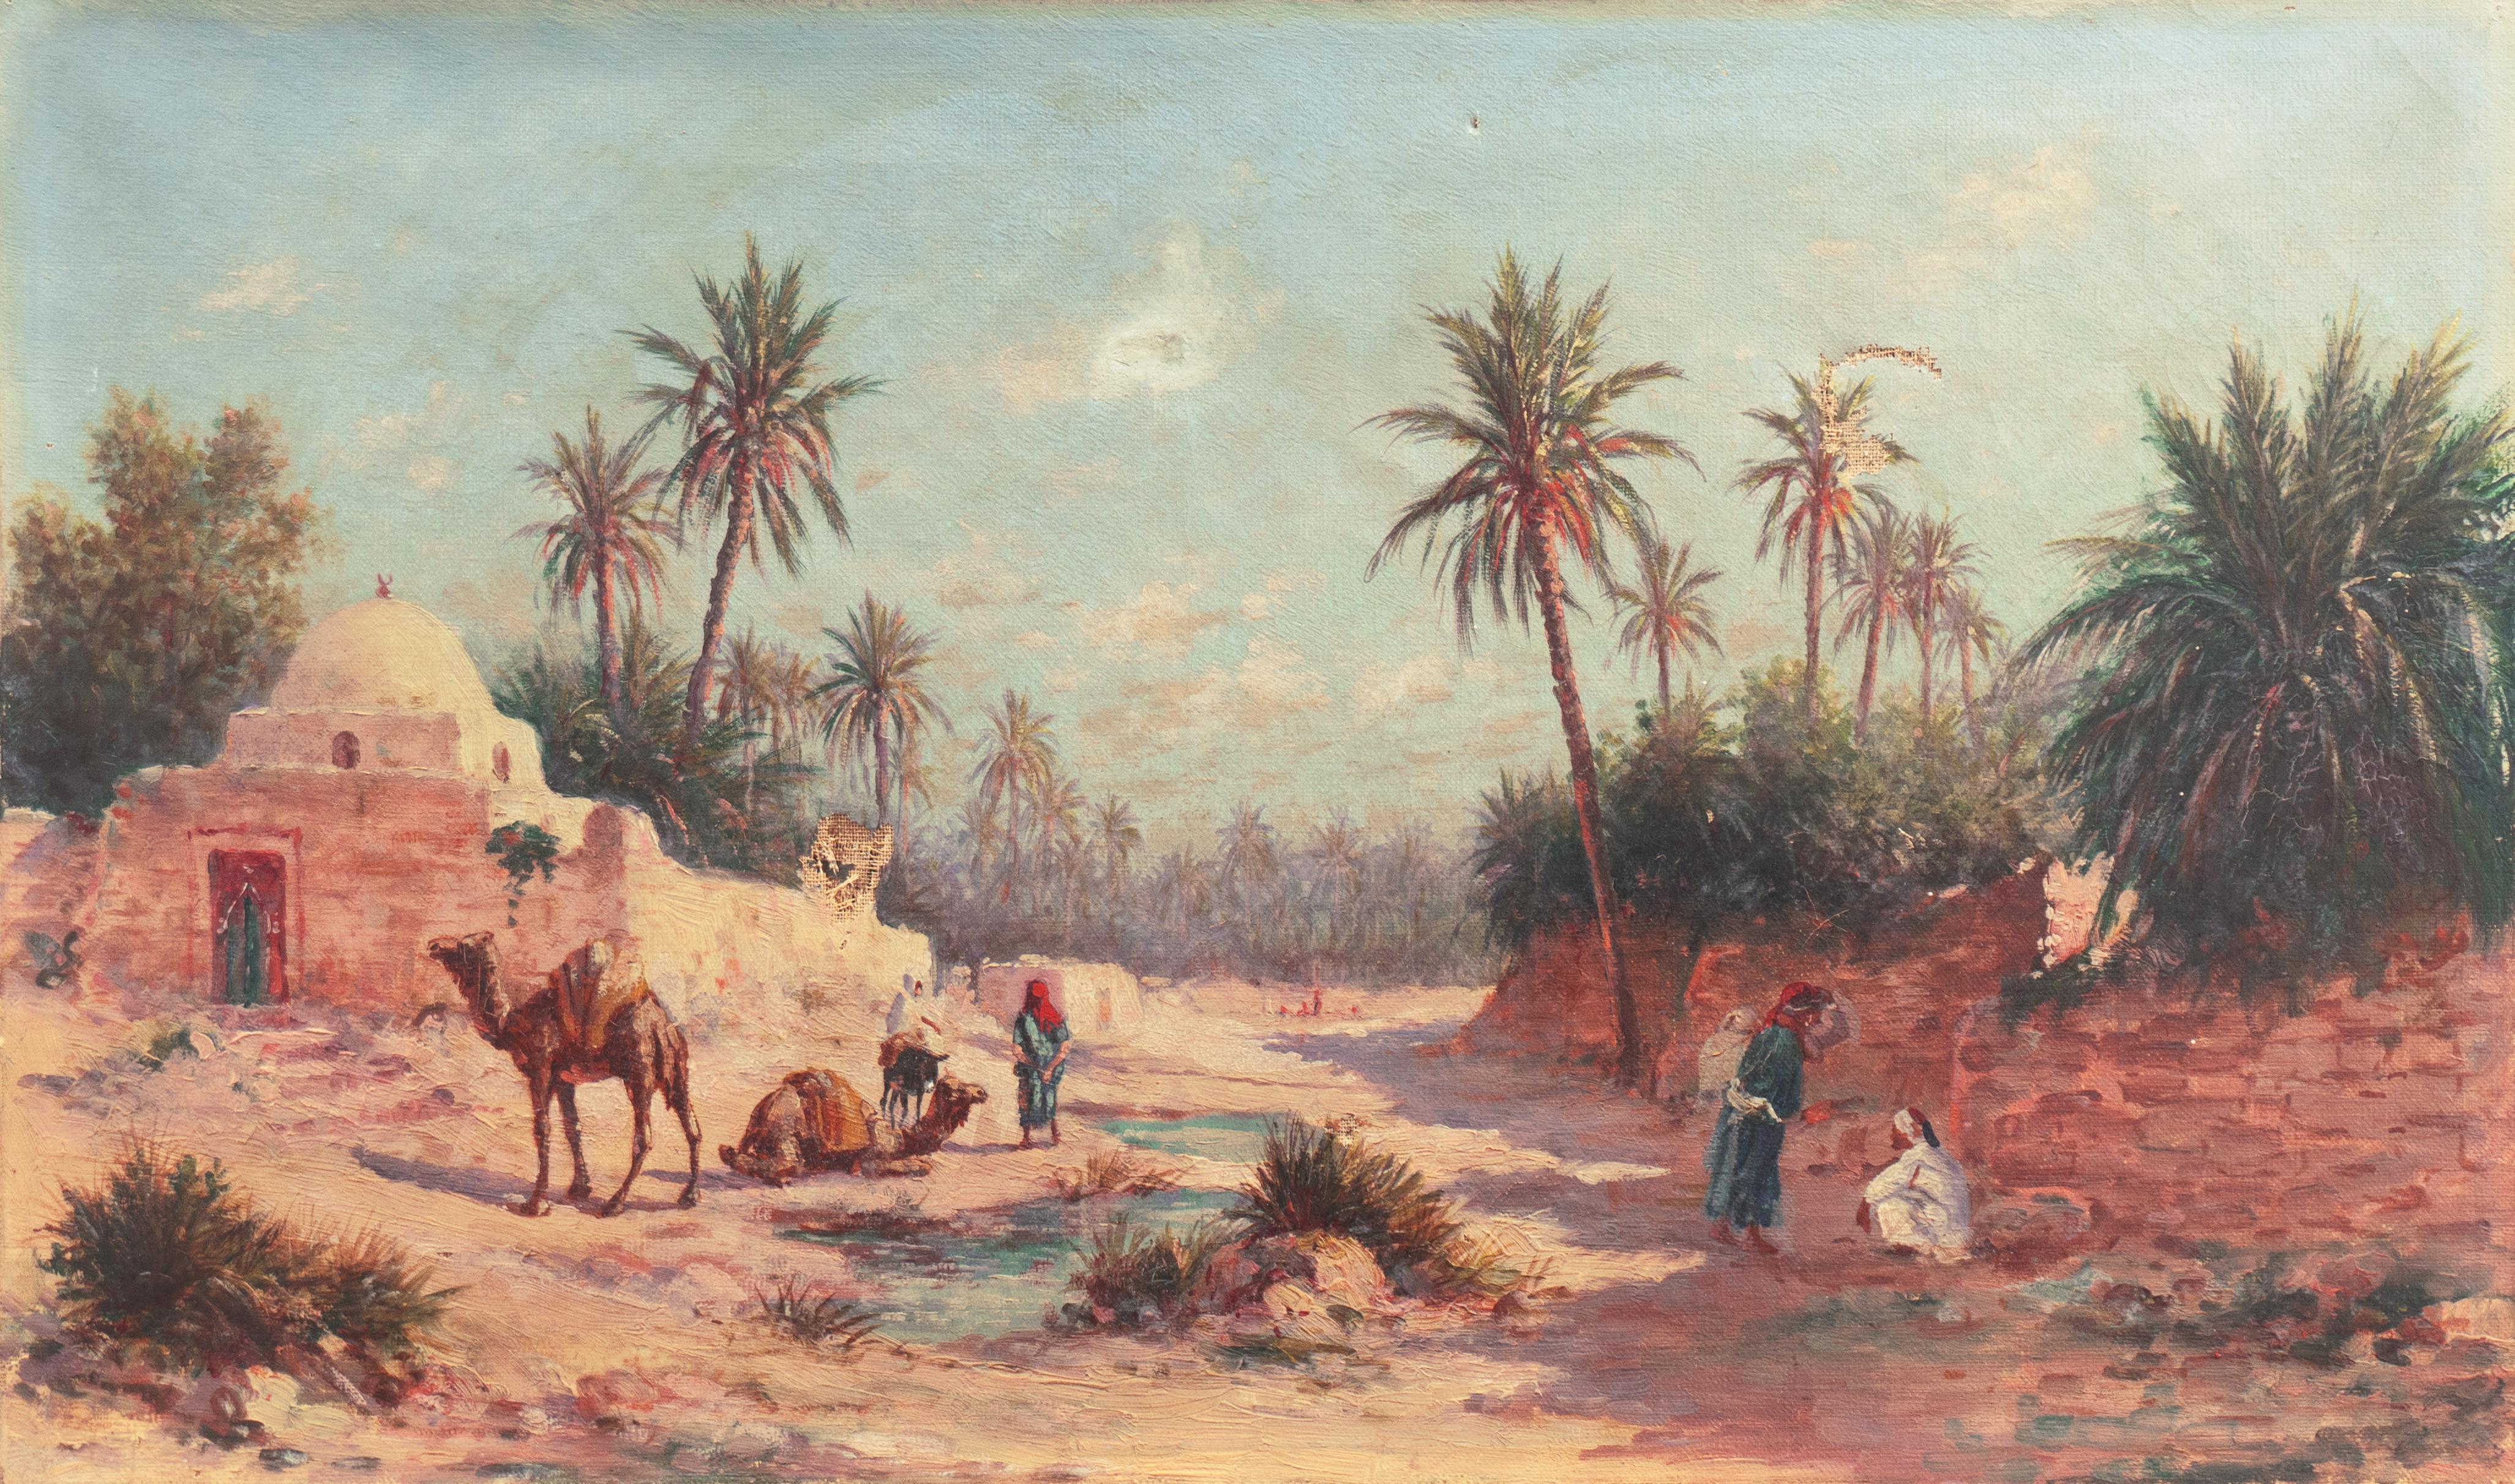 Unknown Landscape Painting - 'Camels at a Tunisian Oasis', French School Orientalism, North African, Romantic